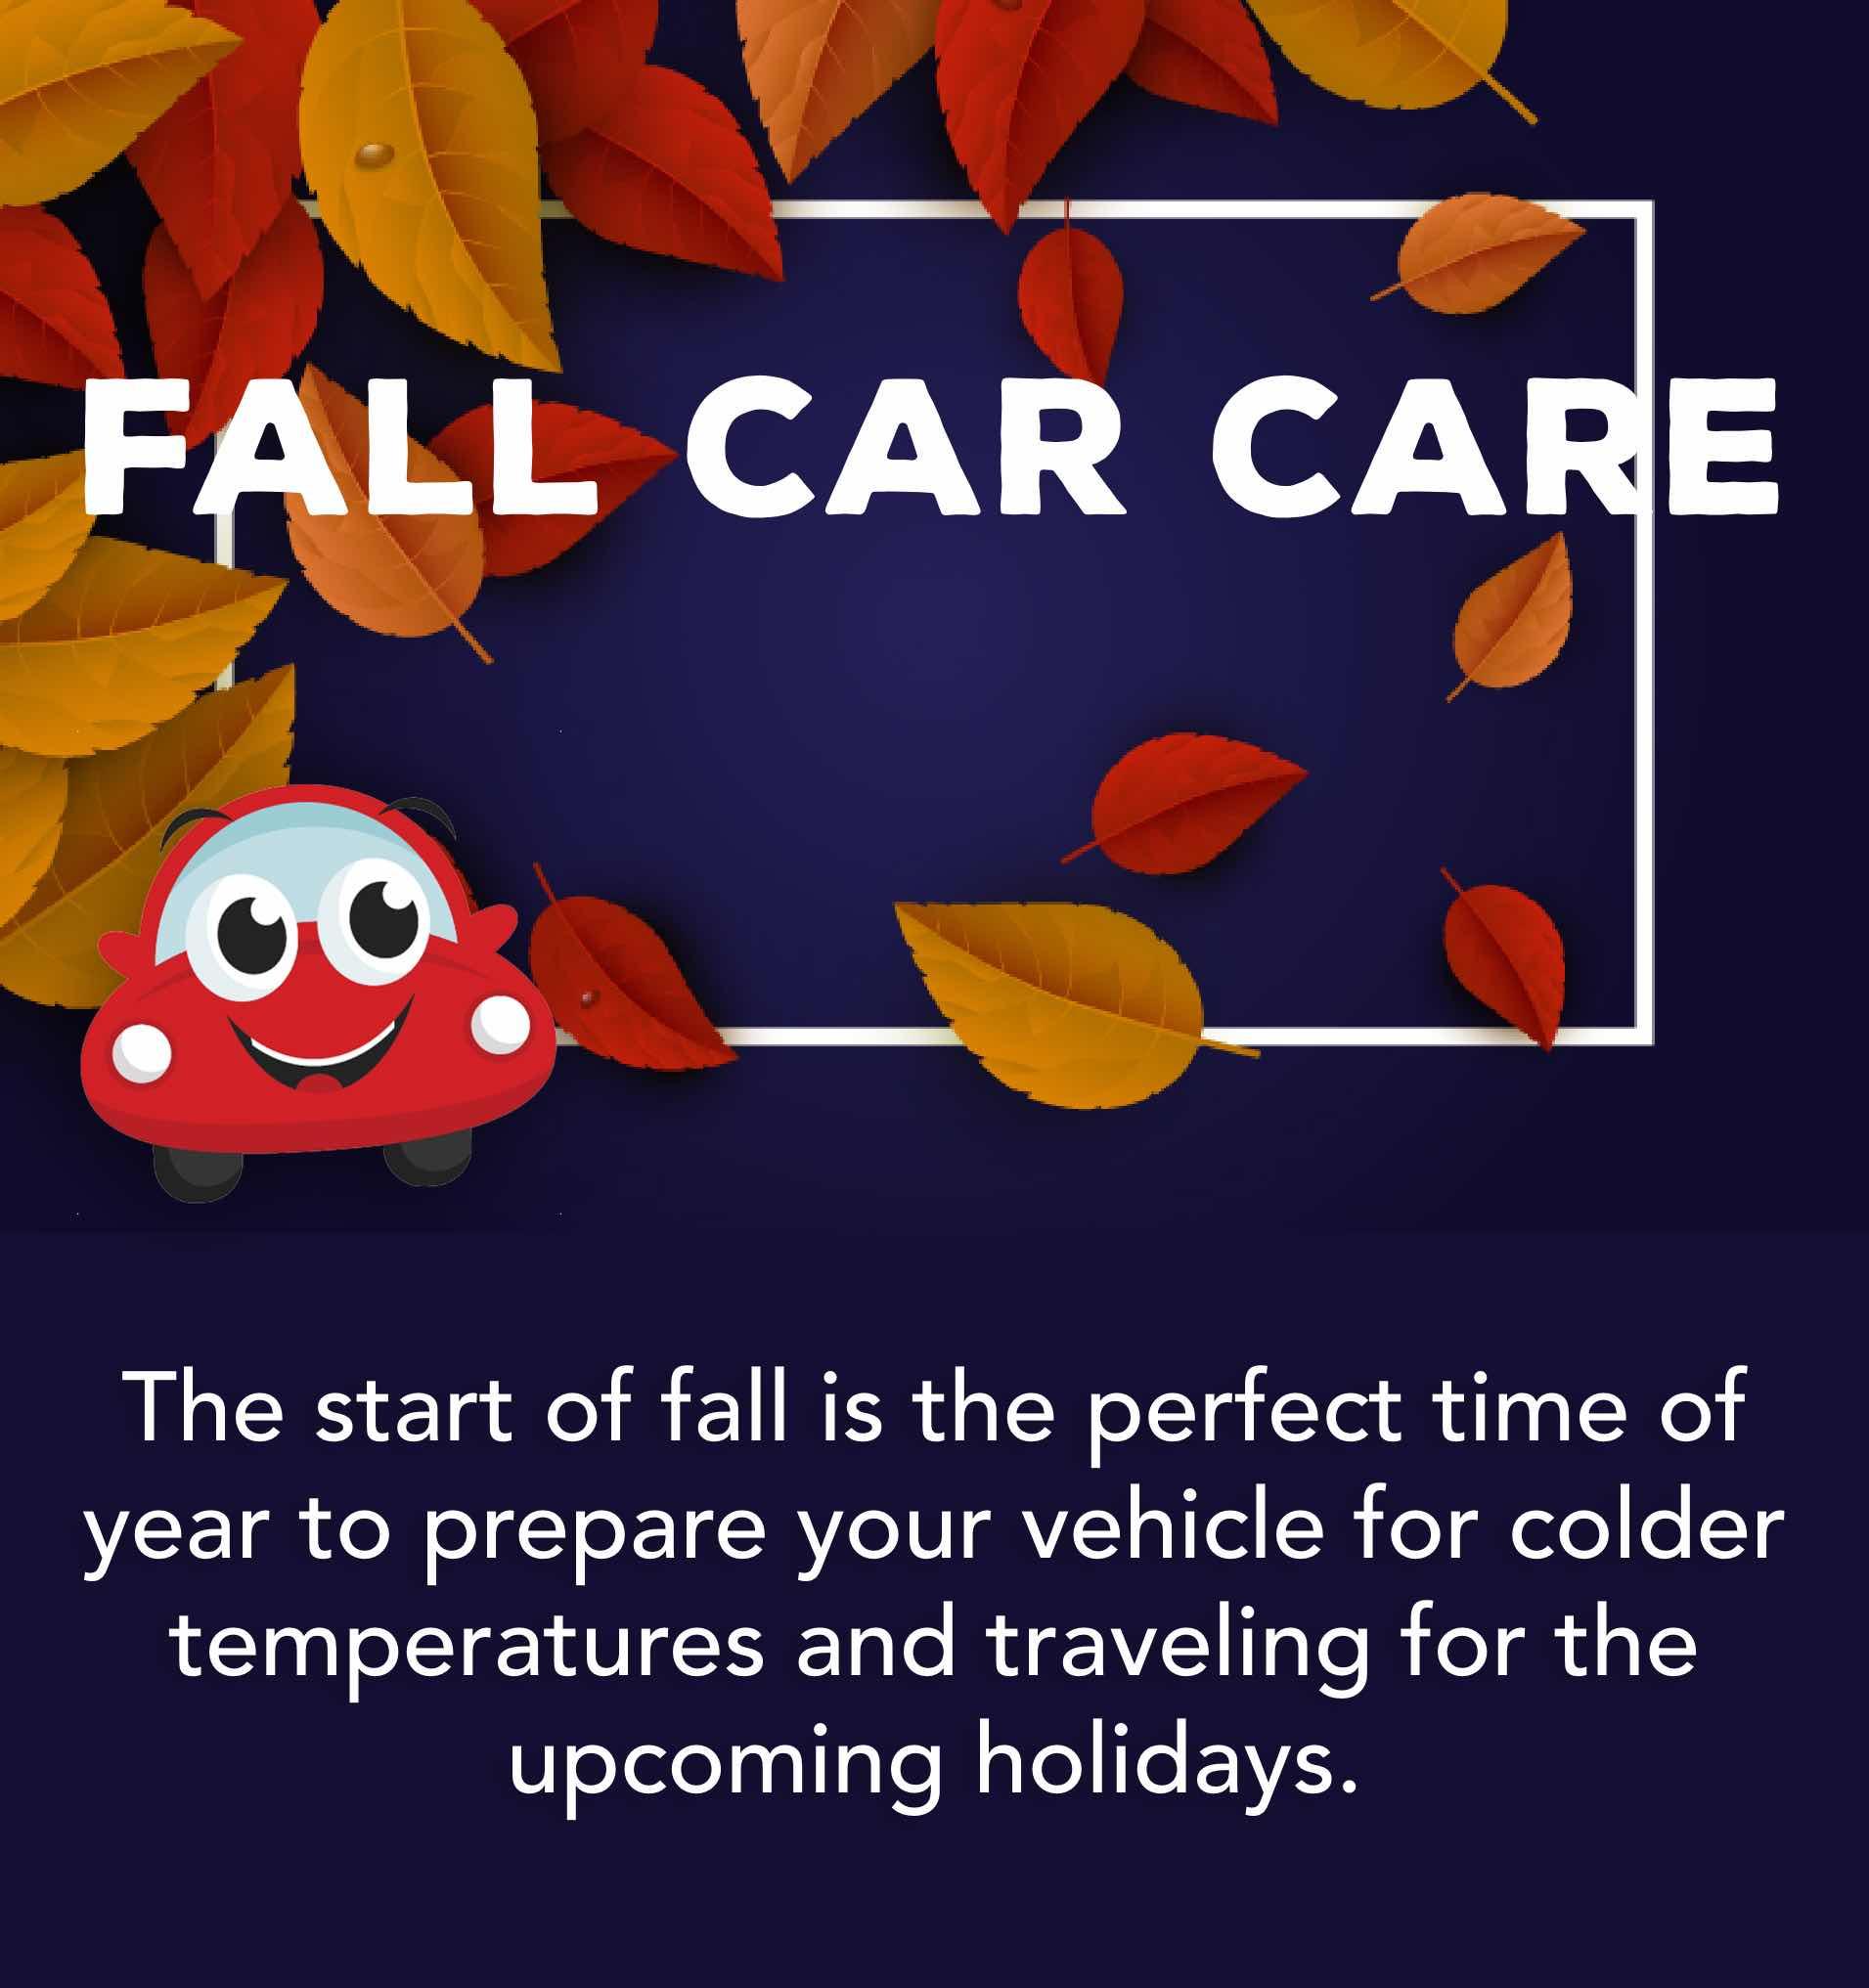 The start of fall is the perfect time of year to prepare your vehicle for colder temperatures and traveling for the upcoming holidays.